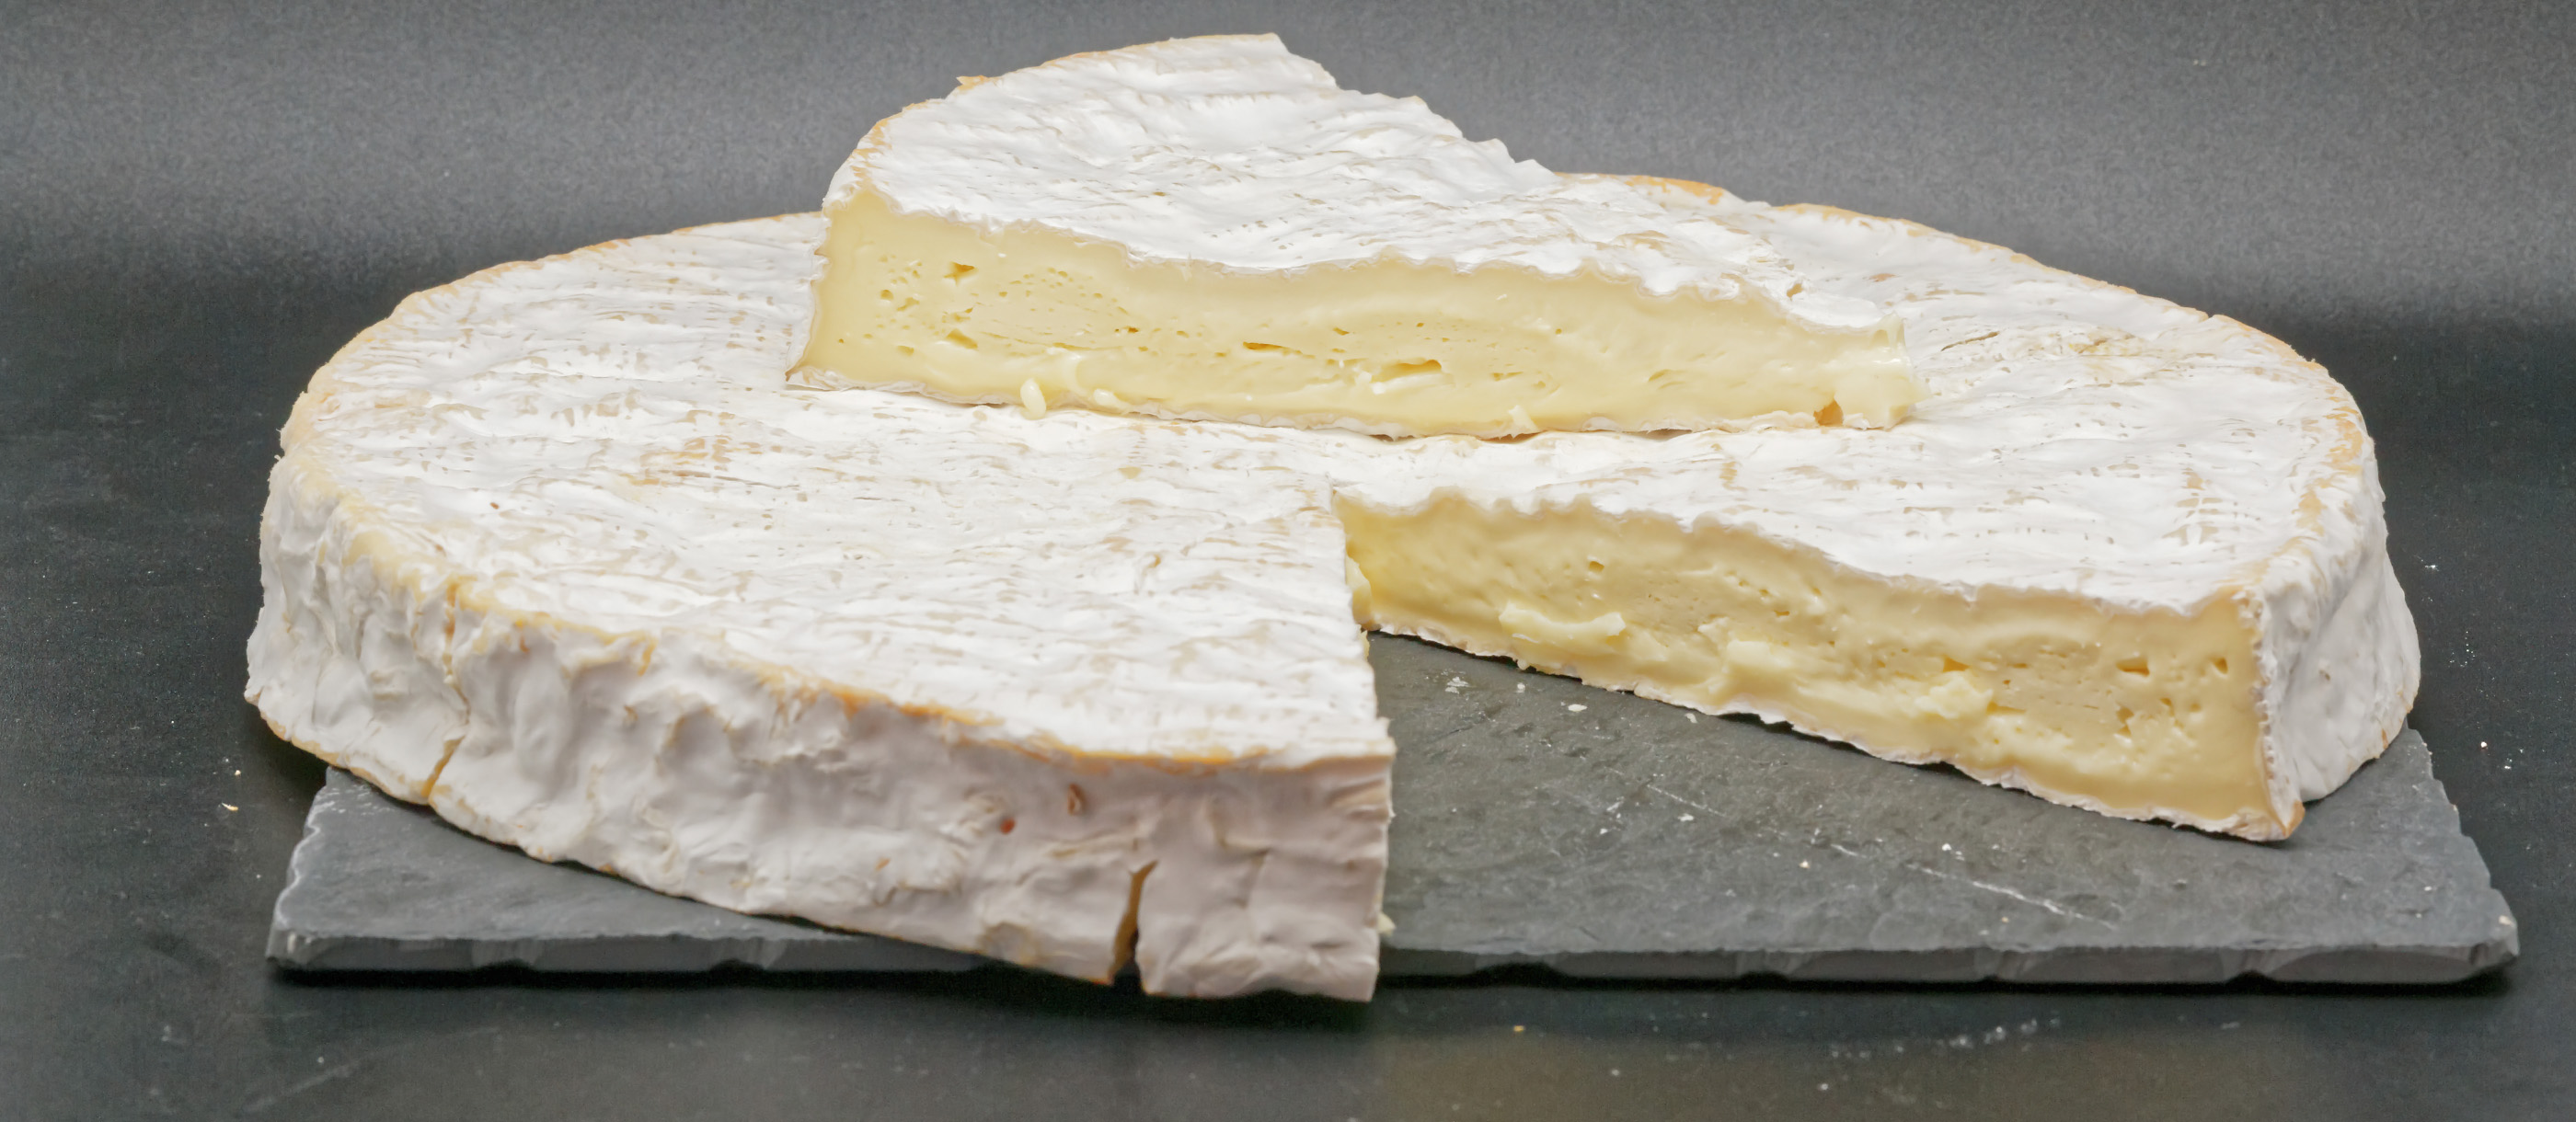 Brie De Meaux Local Cheese From Meaux France 